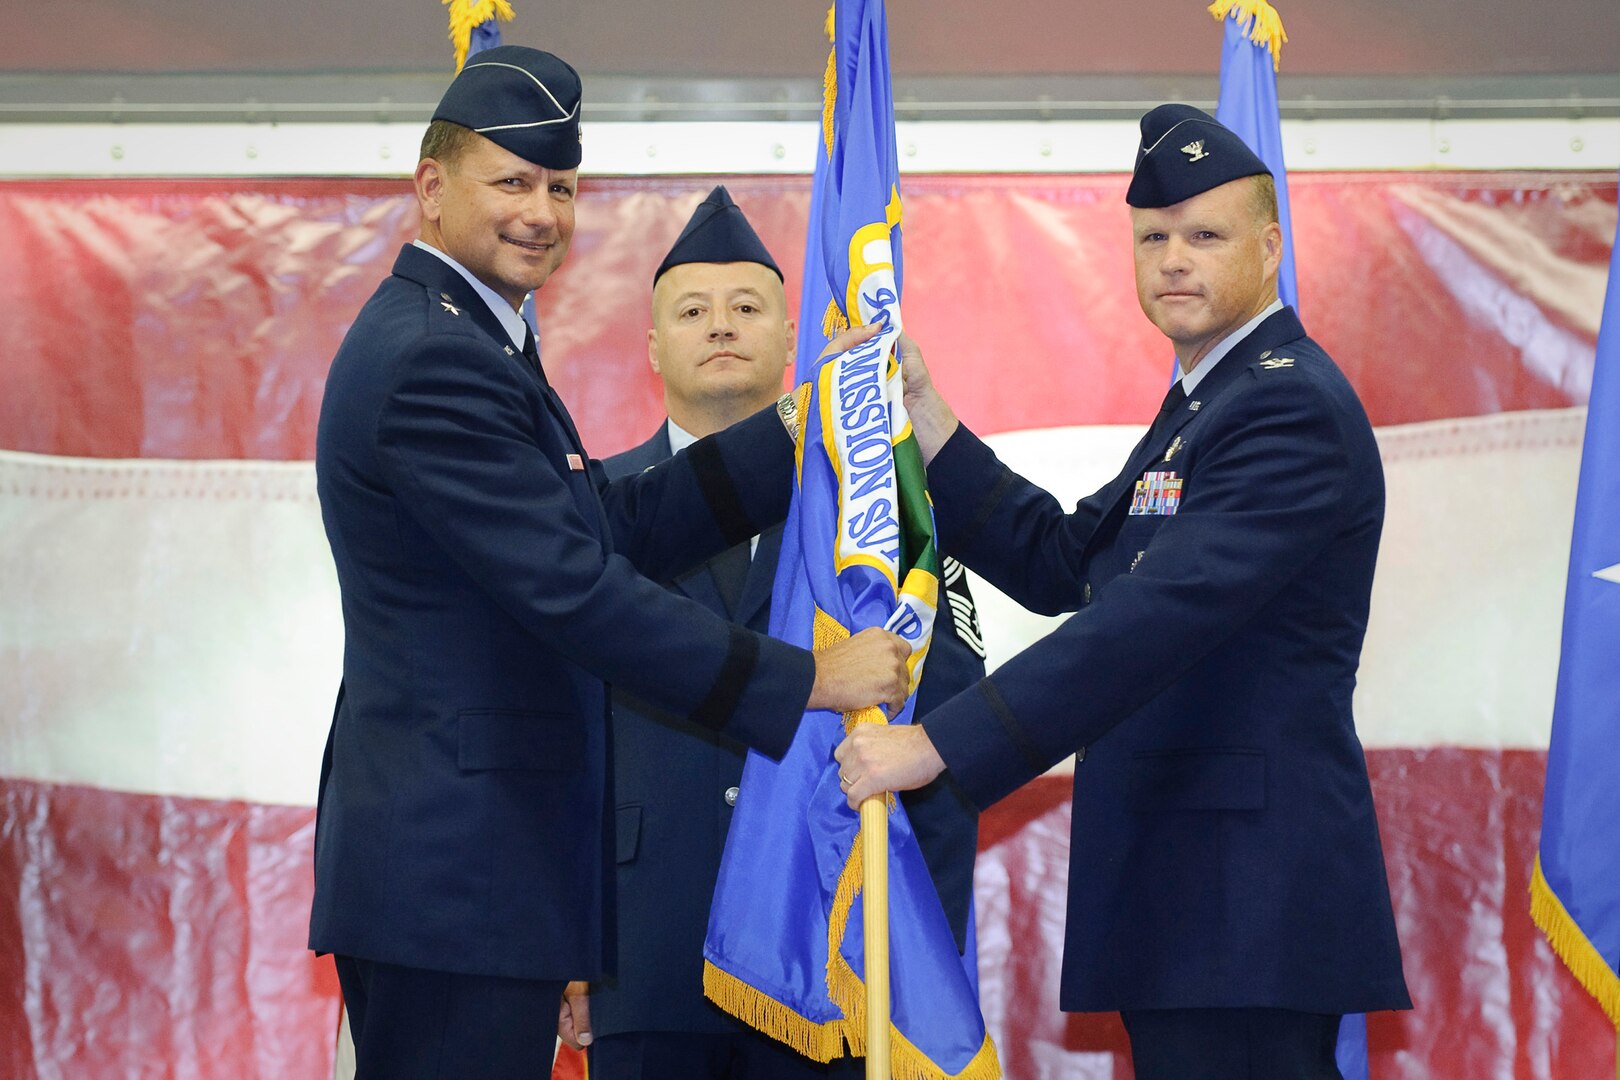 Brig. Gen. Leonard Patrick, 502nd Air Base Wing commander, passes the group guidon to Col. Scott Peel, incoming 902nd Mission Support Group commander, during a change of command ceremony held in hangar four at Randolph Air Force Base, Texas August 2. (U.S. Air Force photo/Steve Thurow)